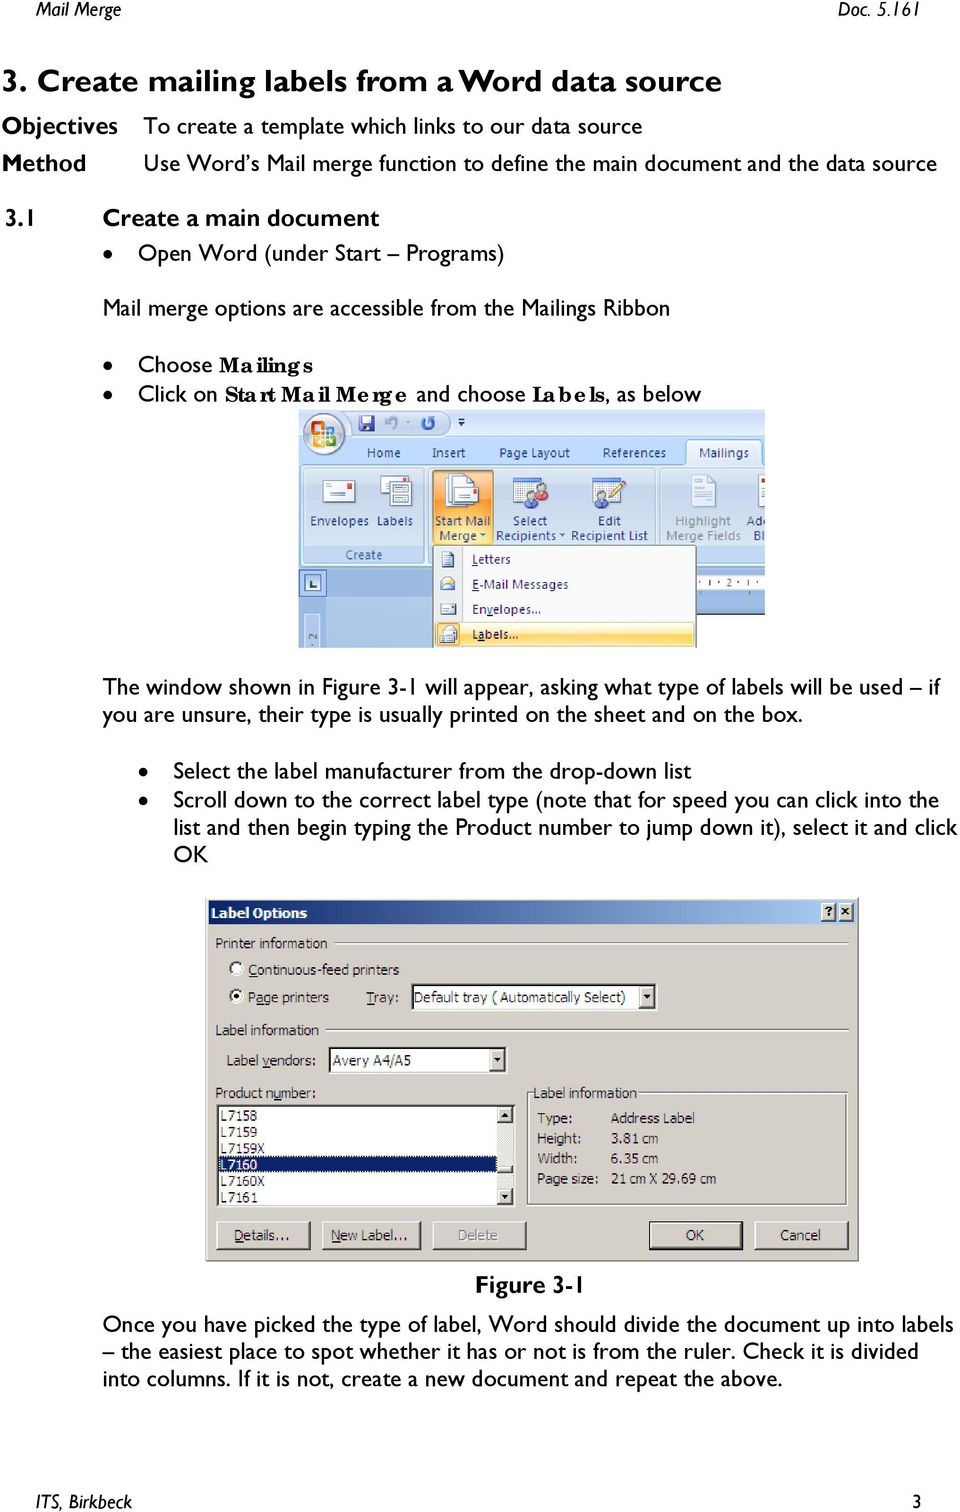 1 Create a main document Open Word (under Start Programs) Mail merge options are accessible from the Mailings Ribbon Choose Mailings Click on Start Mail Merge and choose Labels, as below The window